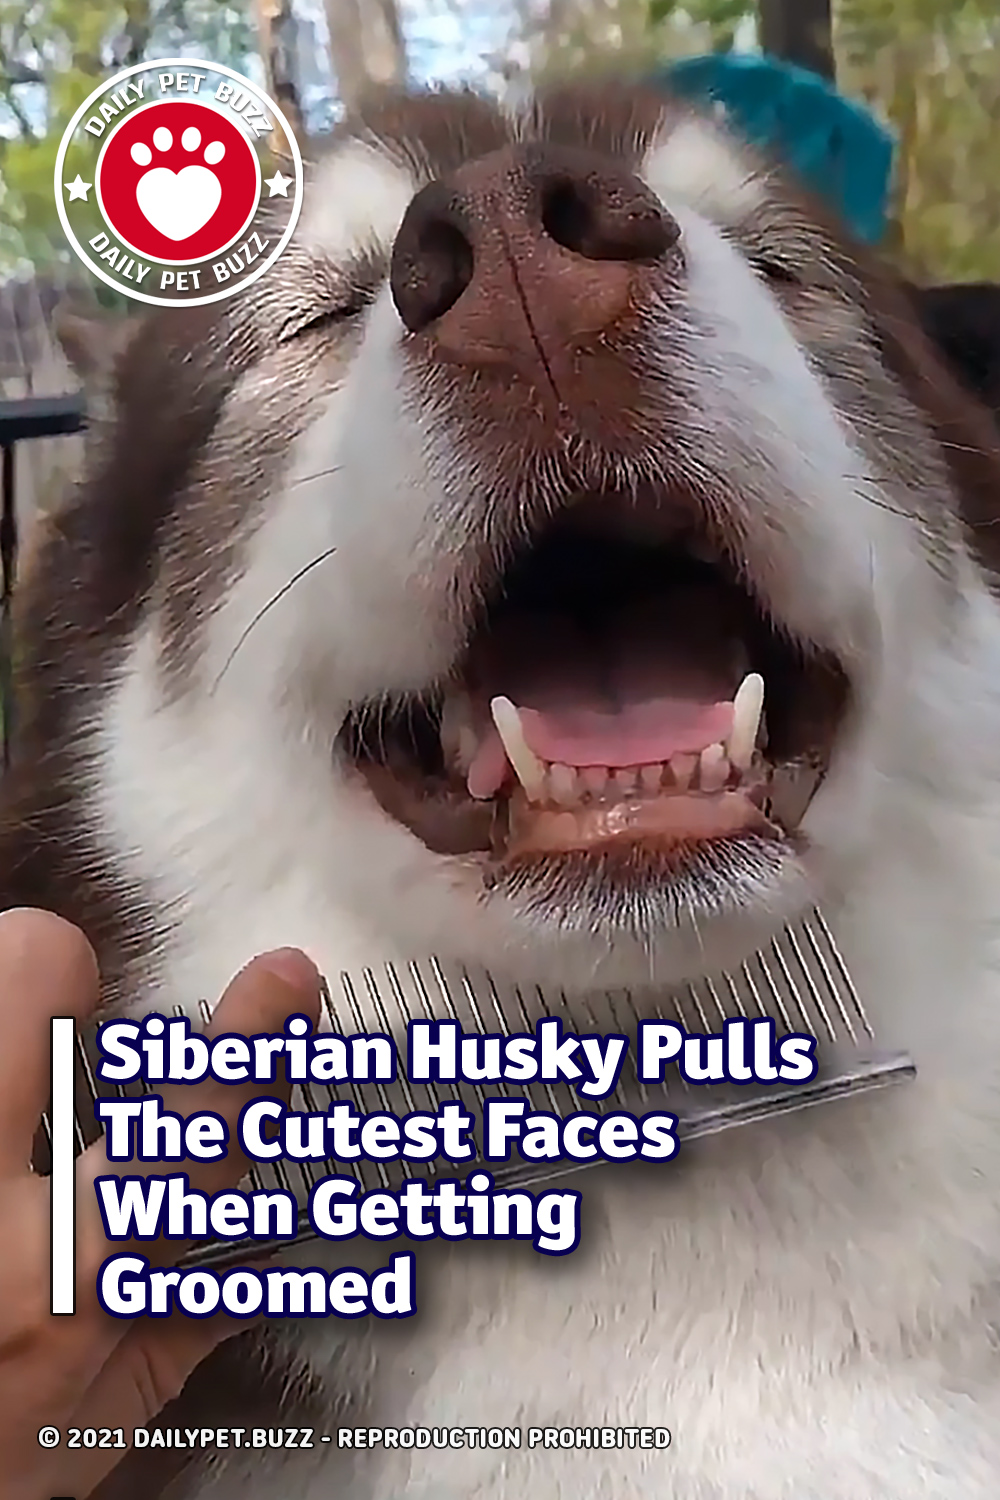 Siberian Husky Pulls The Cutest Faces When Getting Groomed